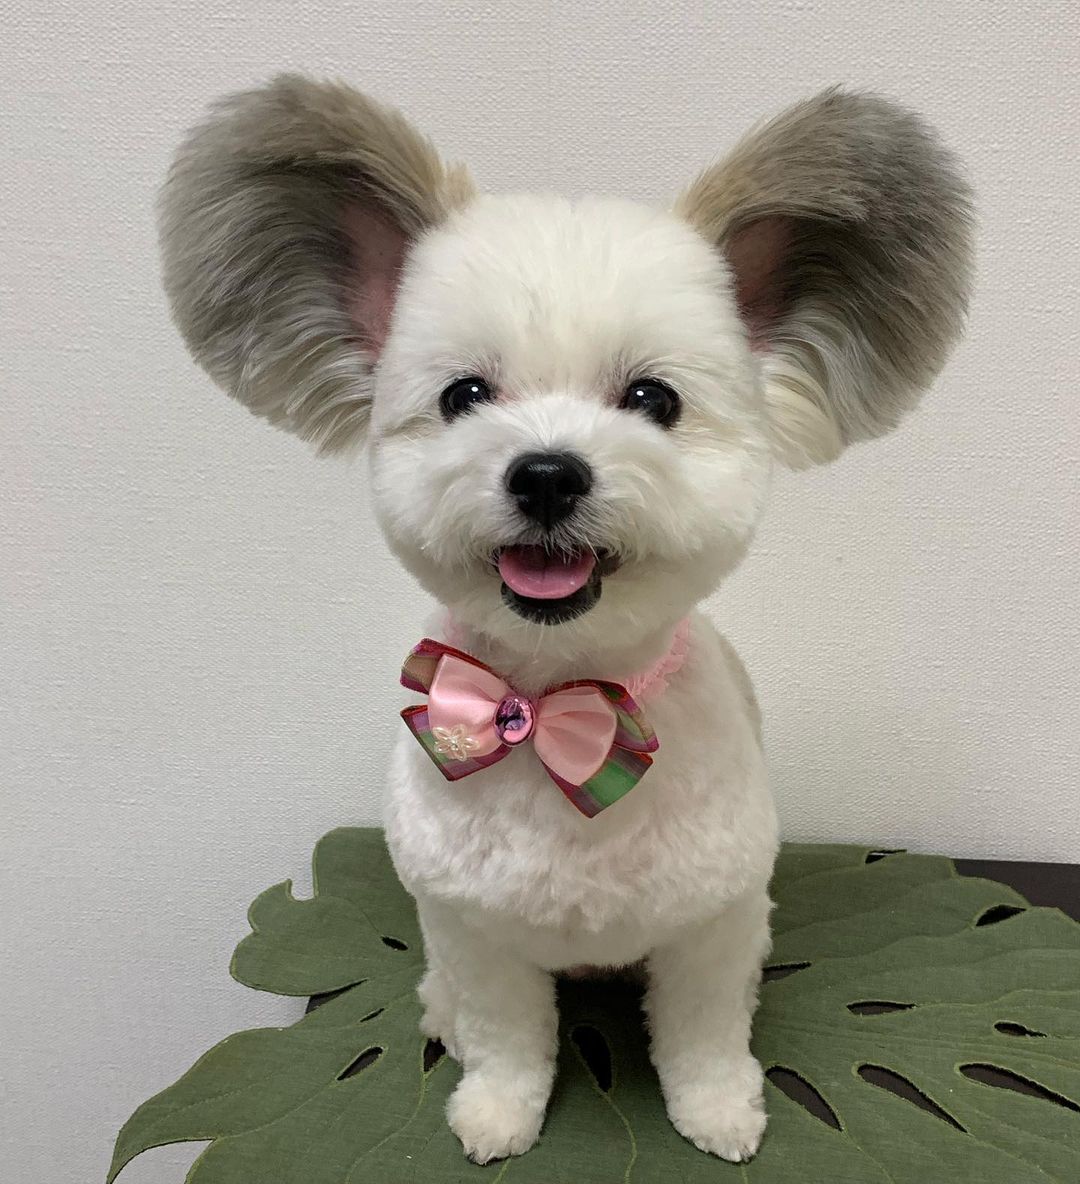 Goma the dog with Mickey Mouse ears wearing a bowtie